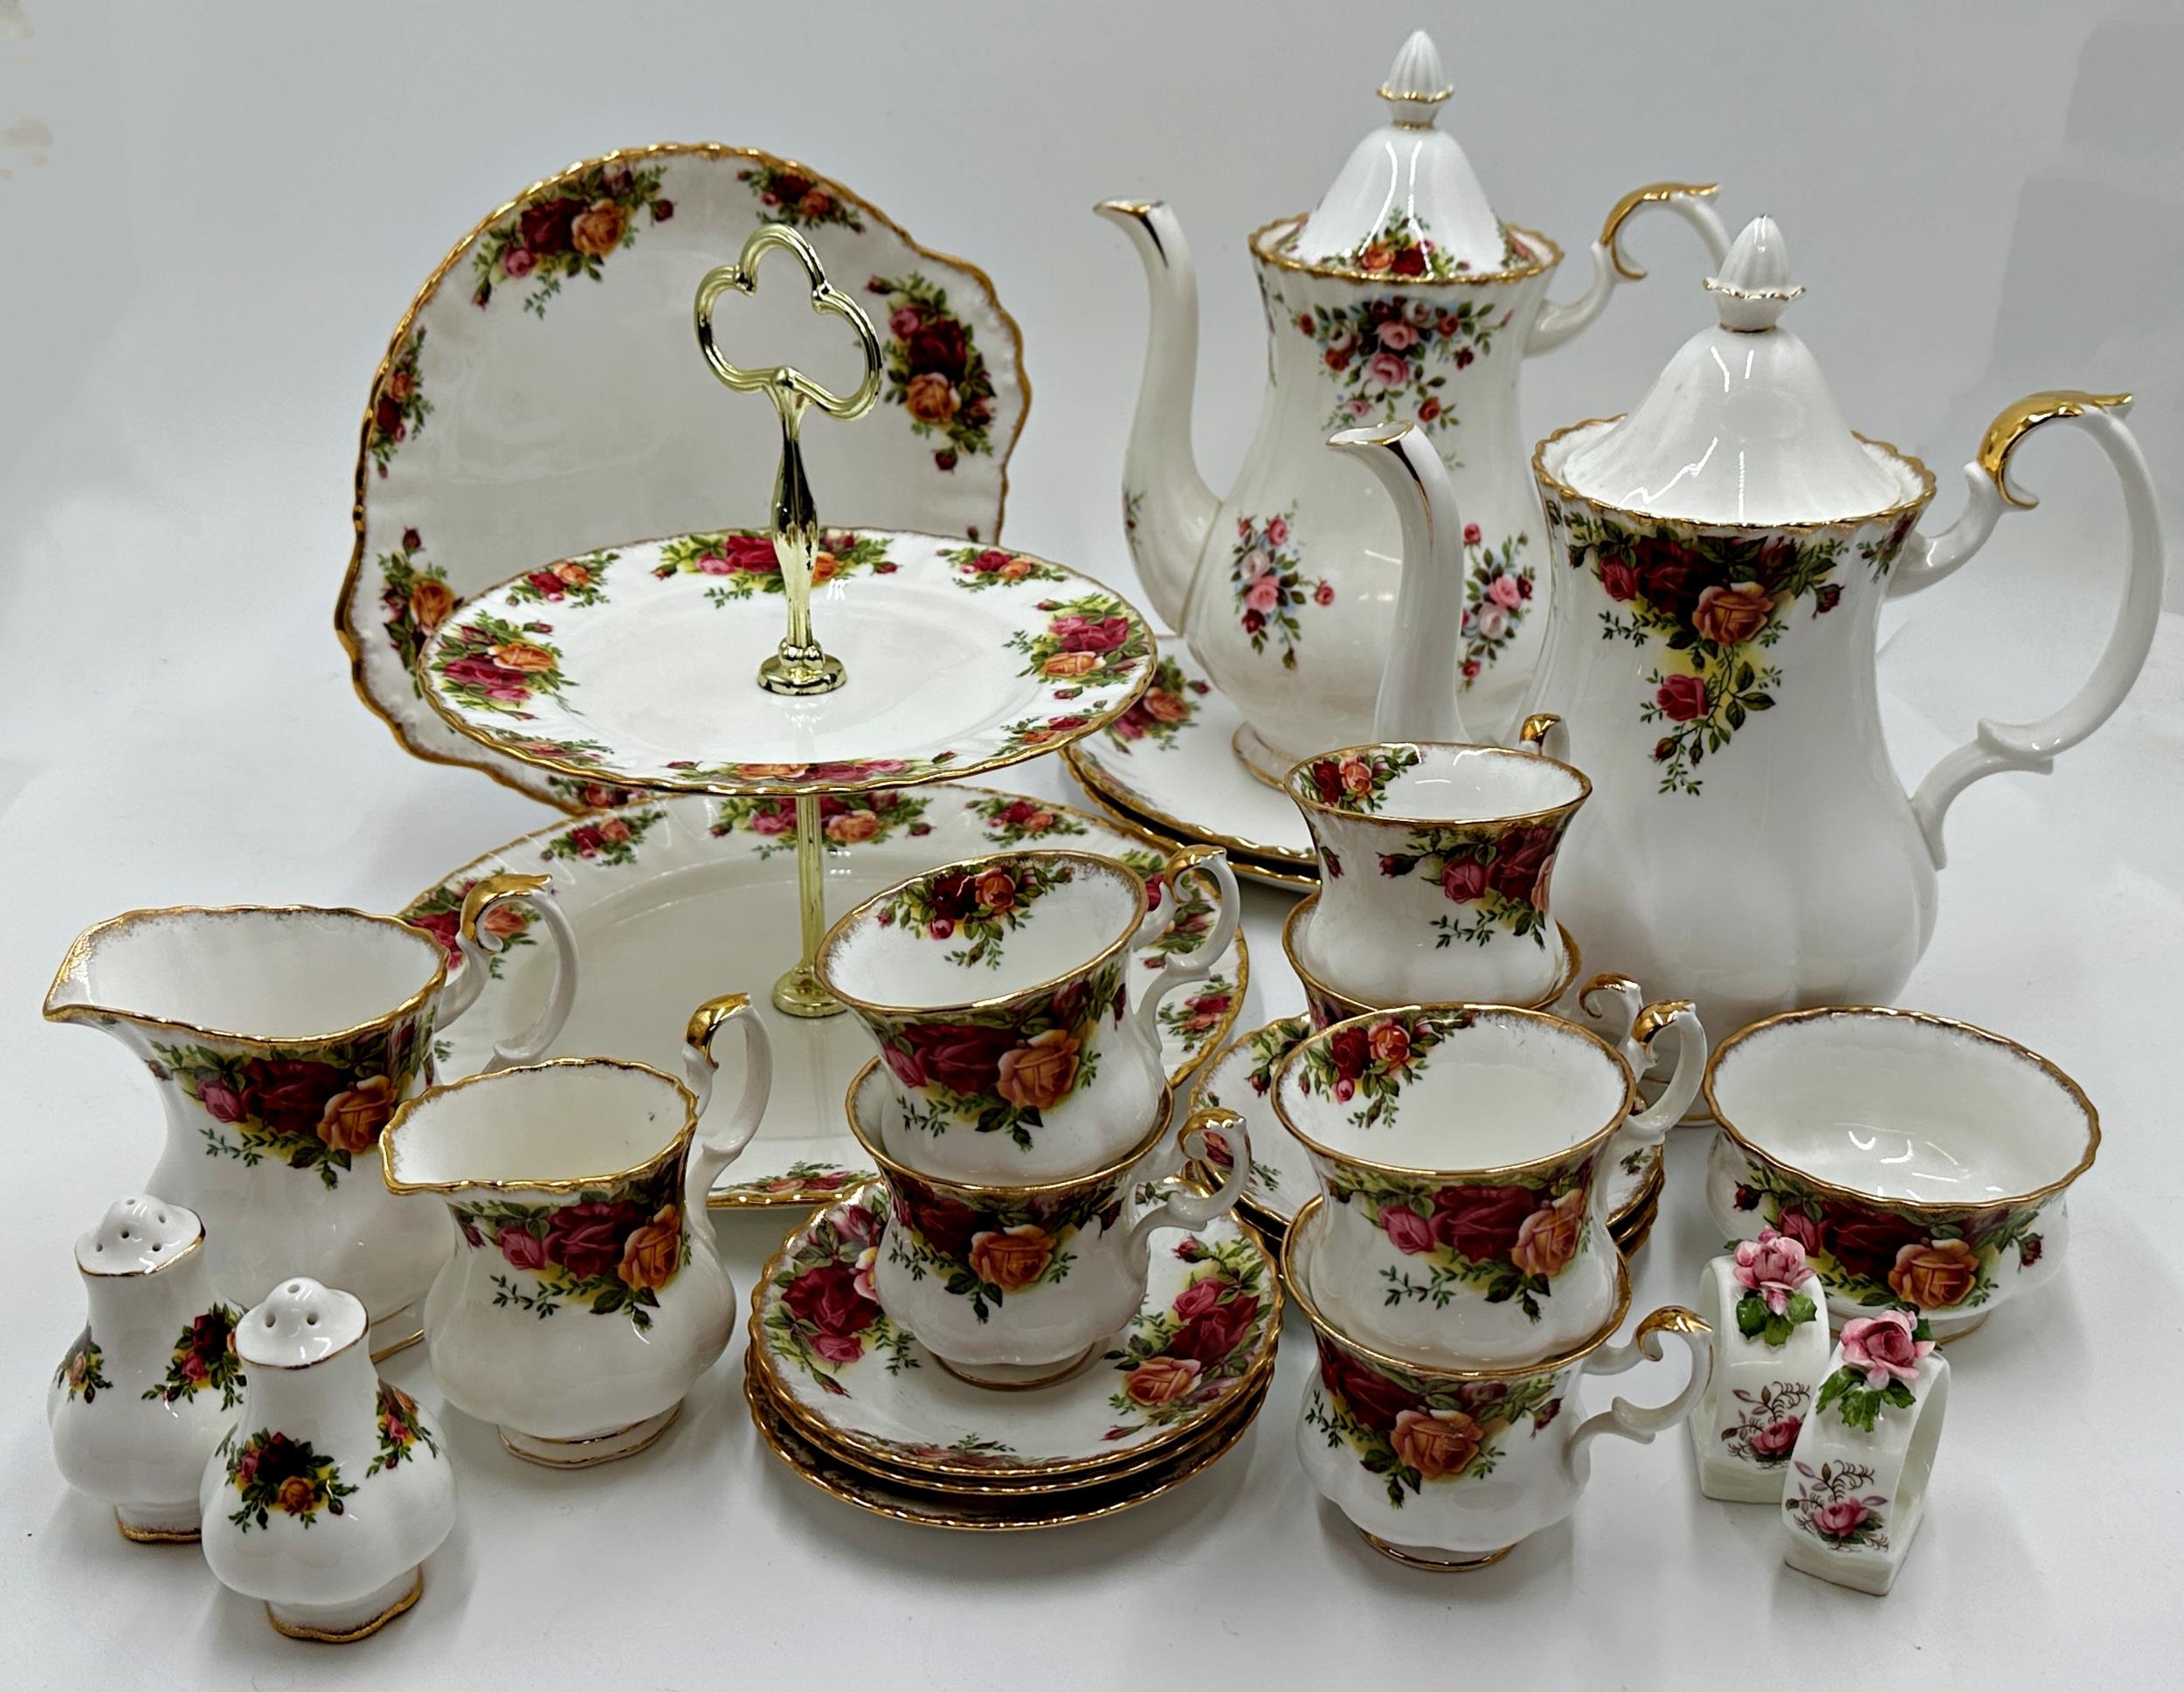 Good collection of Royal Albert 'Old Country Roses' porcelain tea and dinner wares (see images)